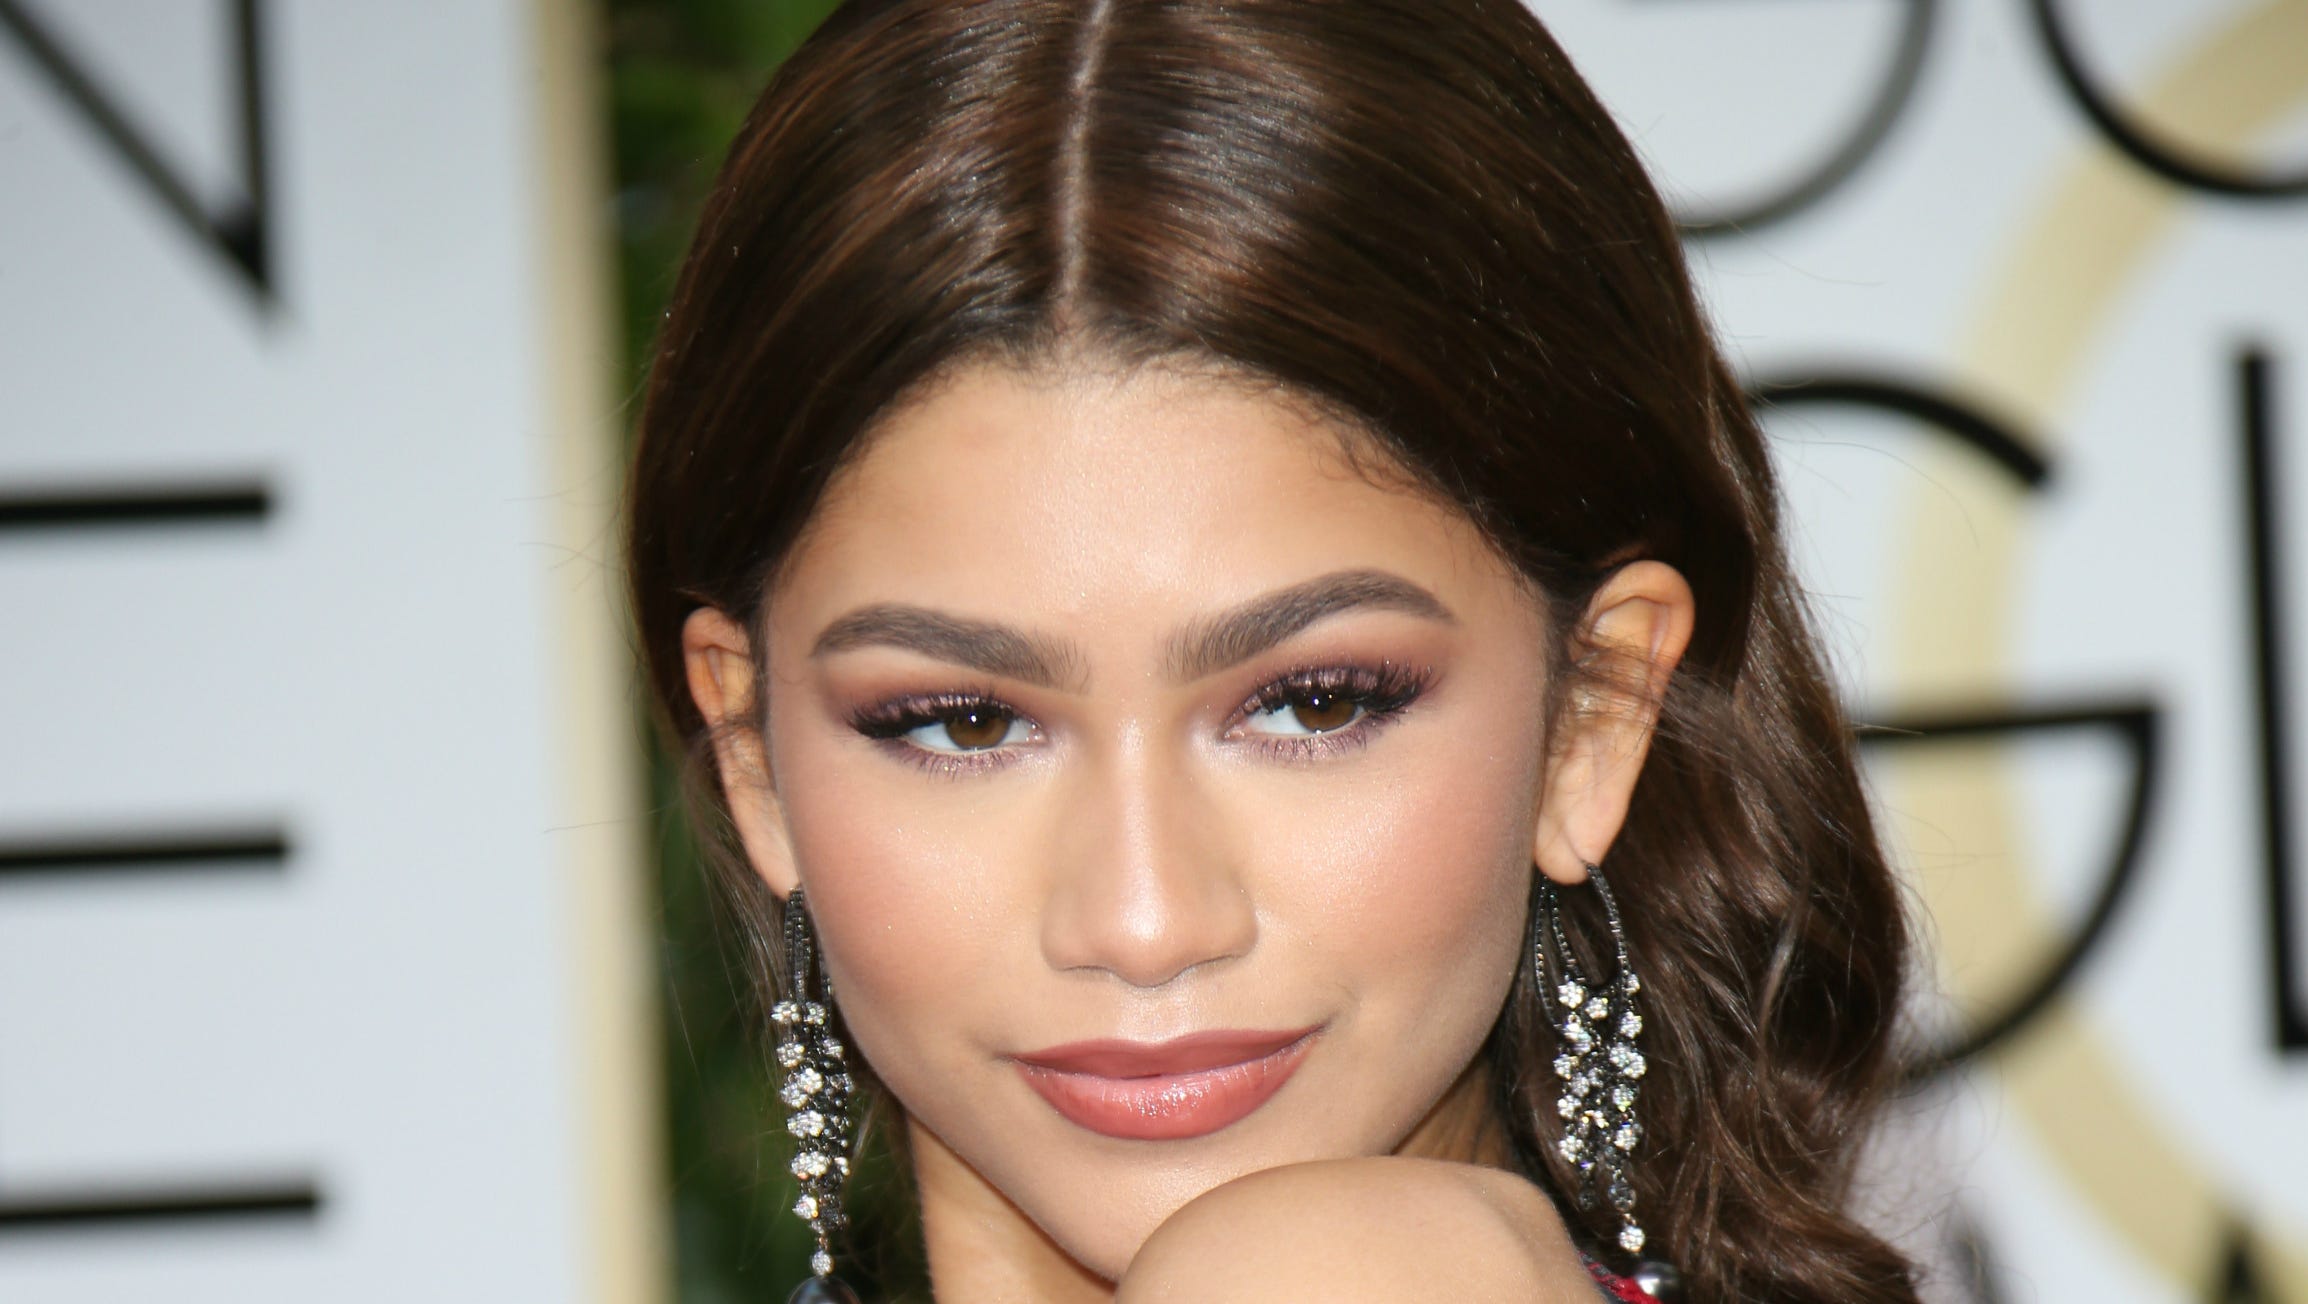 Zendaya’s fashion is all grown up